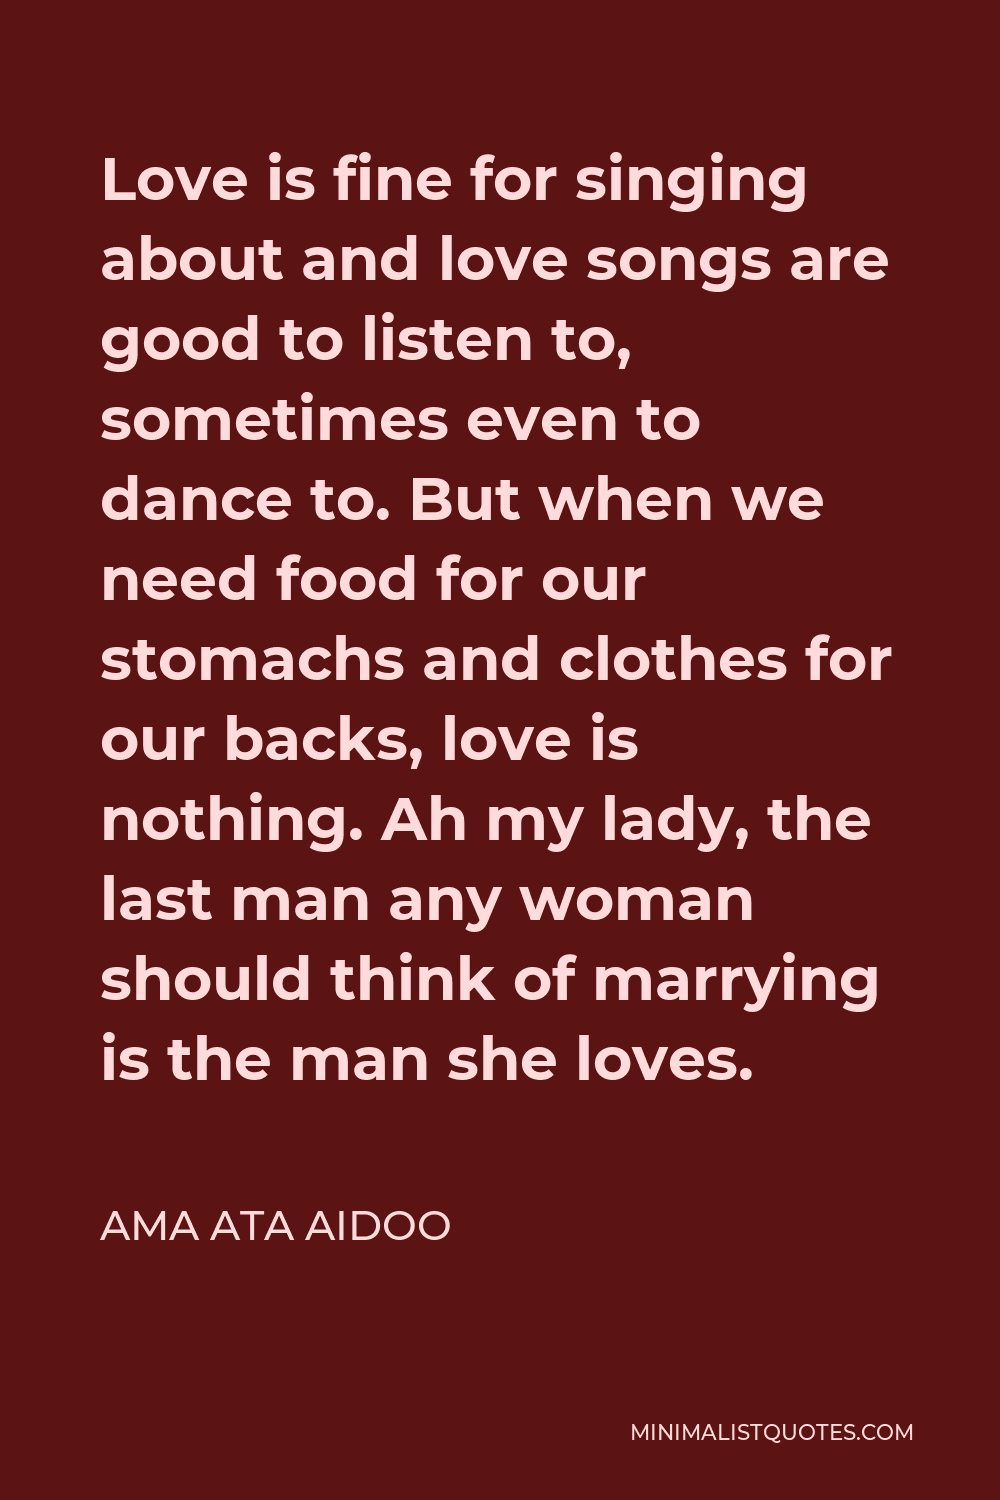 Ama Ata Aidoo Quote - Love is fine for singing about and love songs are good to listen to, sometimes even to dance to. But when we need food for our stomachs and clothes for our backs, love is nothing. Ah my lady, the last man any woman should think of marrying is the man she loves.